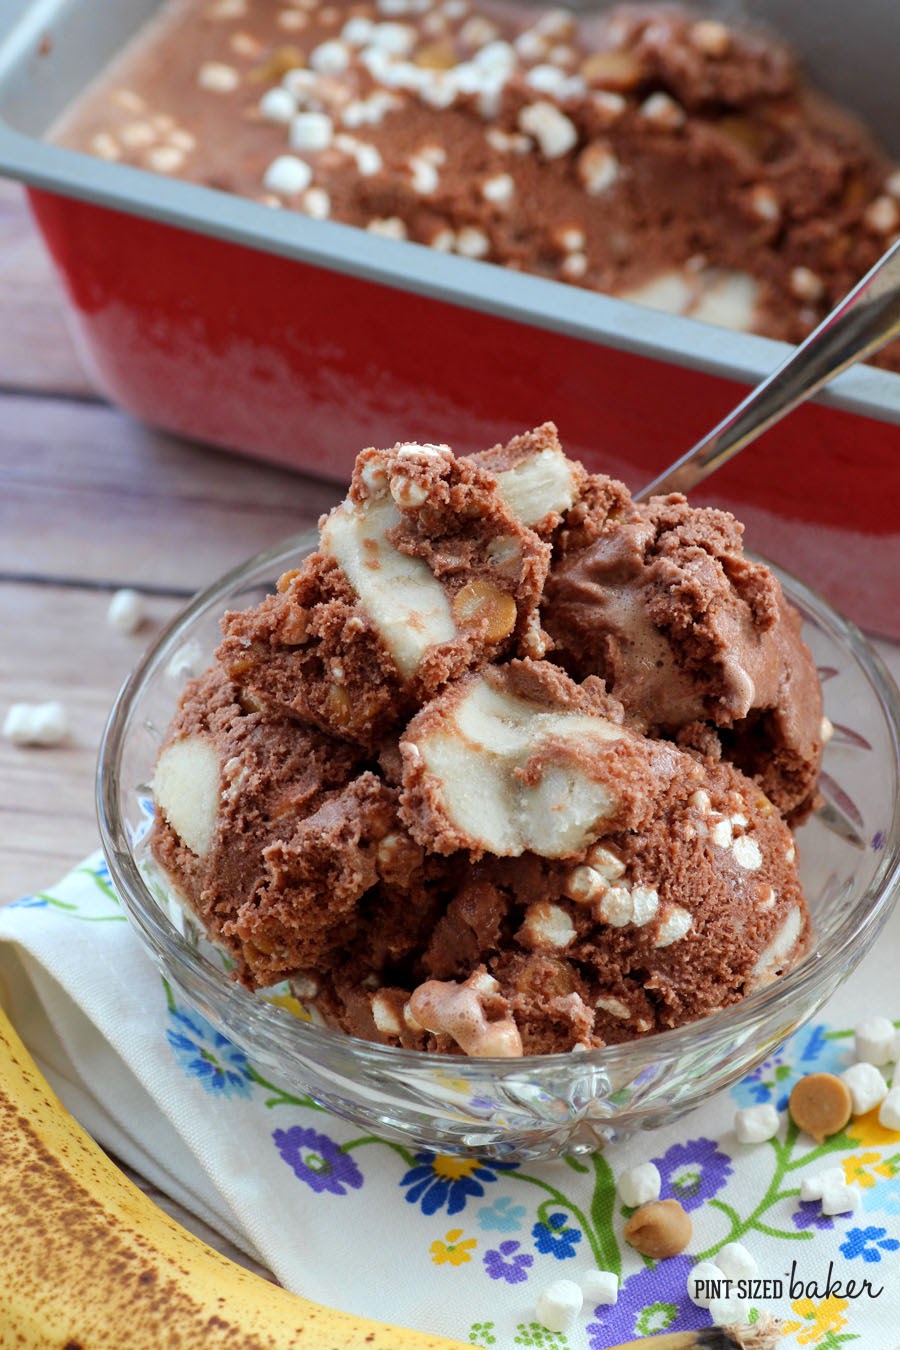 Elvis Ice Cream - Chocolate Ice Cream loaded with frozen Bananas, peanut butter chips, and mini marshmallows.